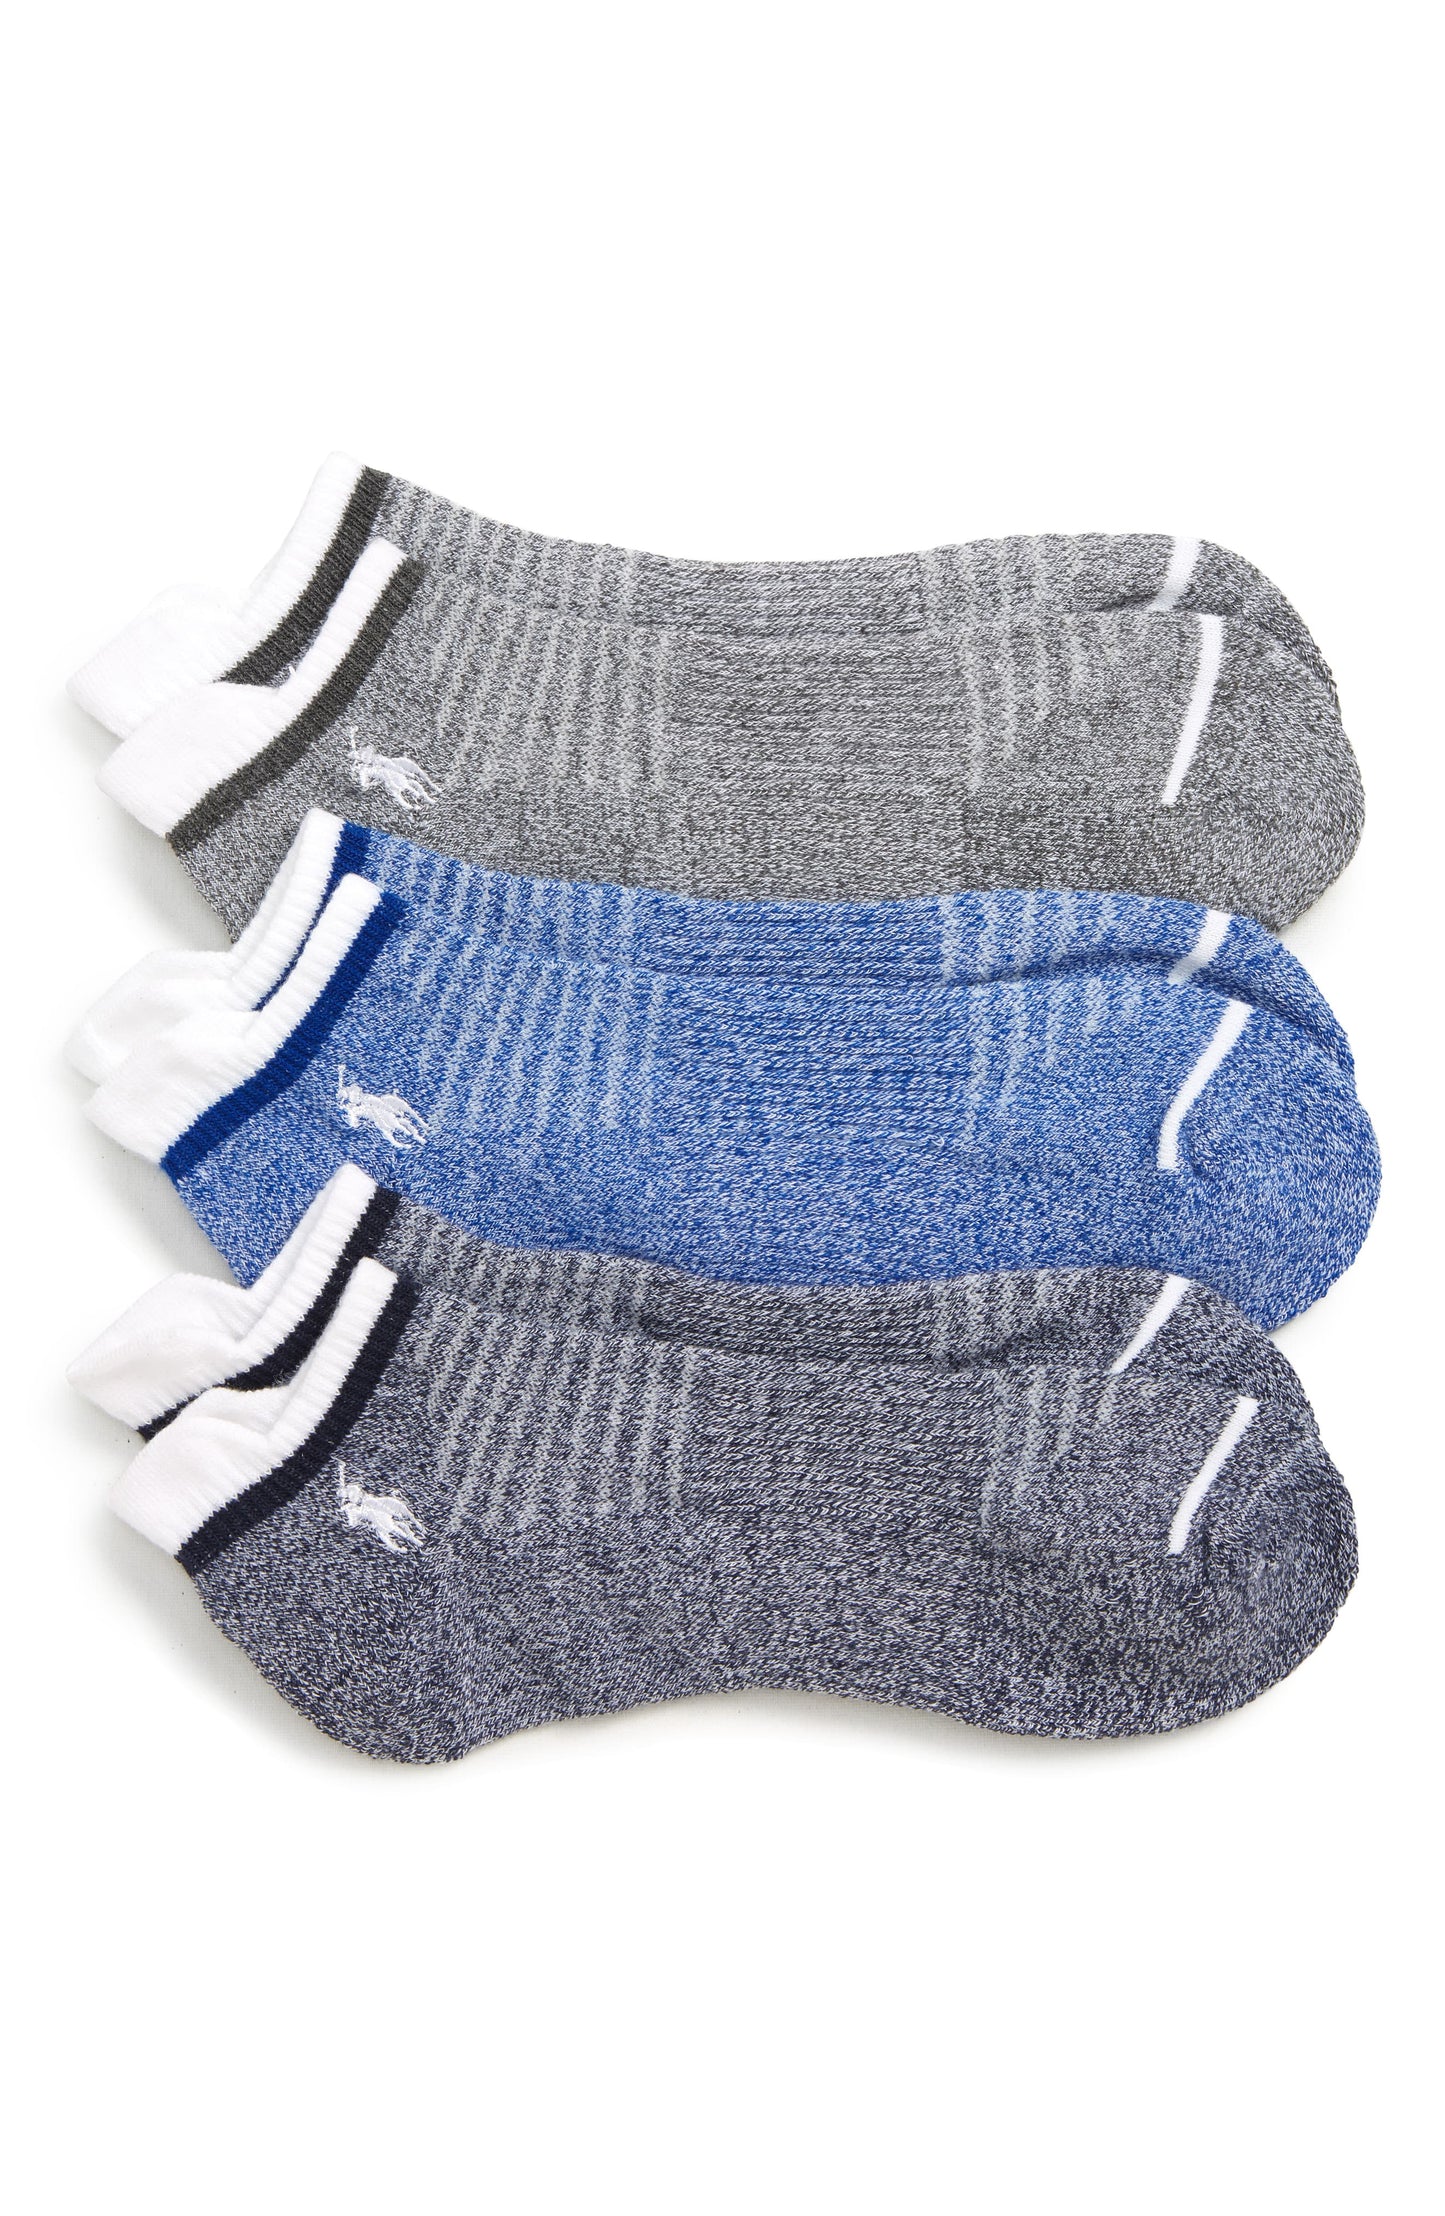 Polo Ralph Lauren 3-Pack Twisted Colorblock Low Cut Athletic Socks Blue Navy